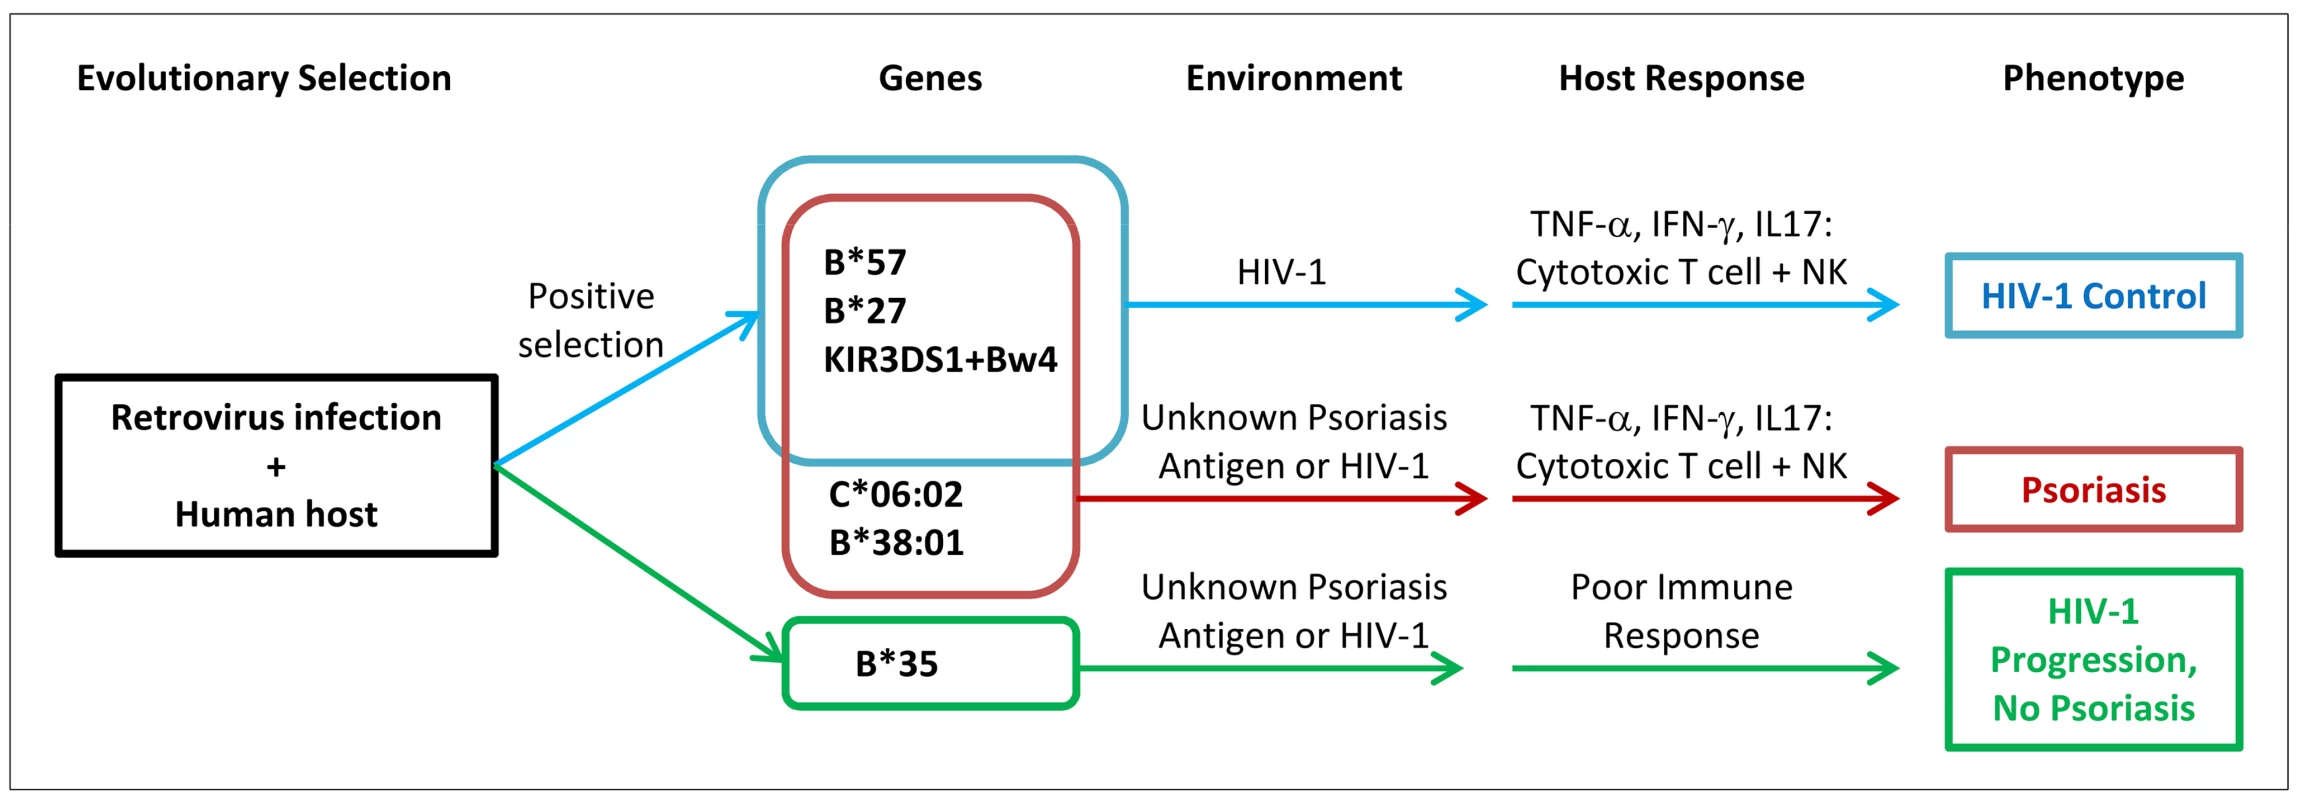 Proposed model of relationship between psoriasis and HIV-1 control.